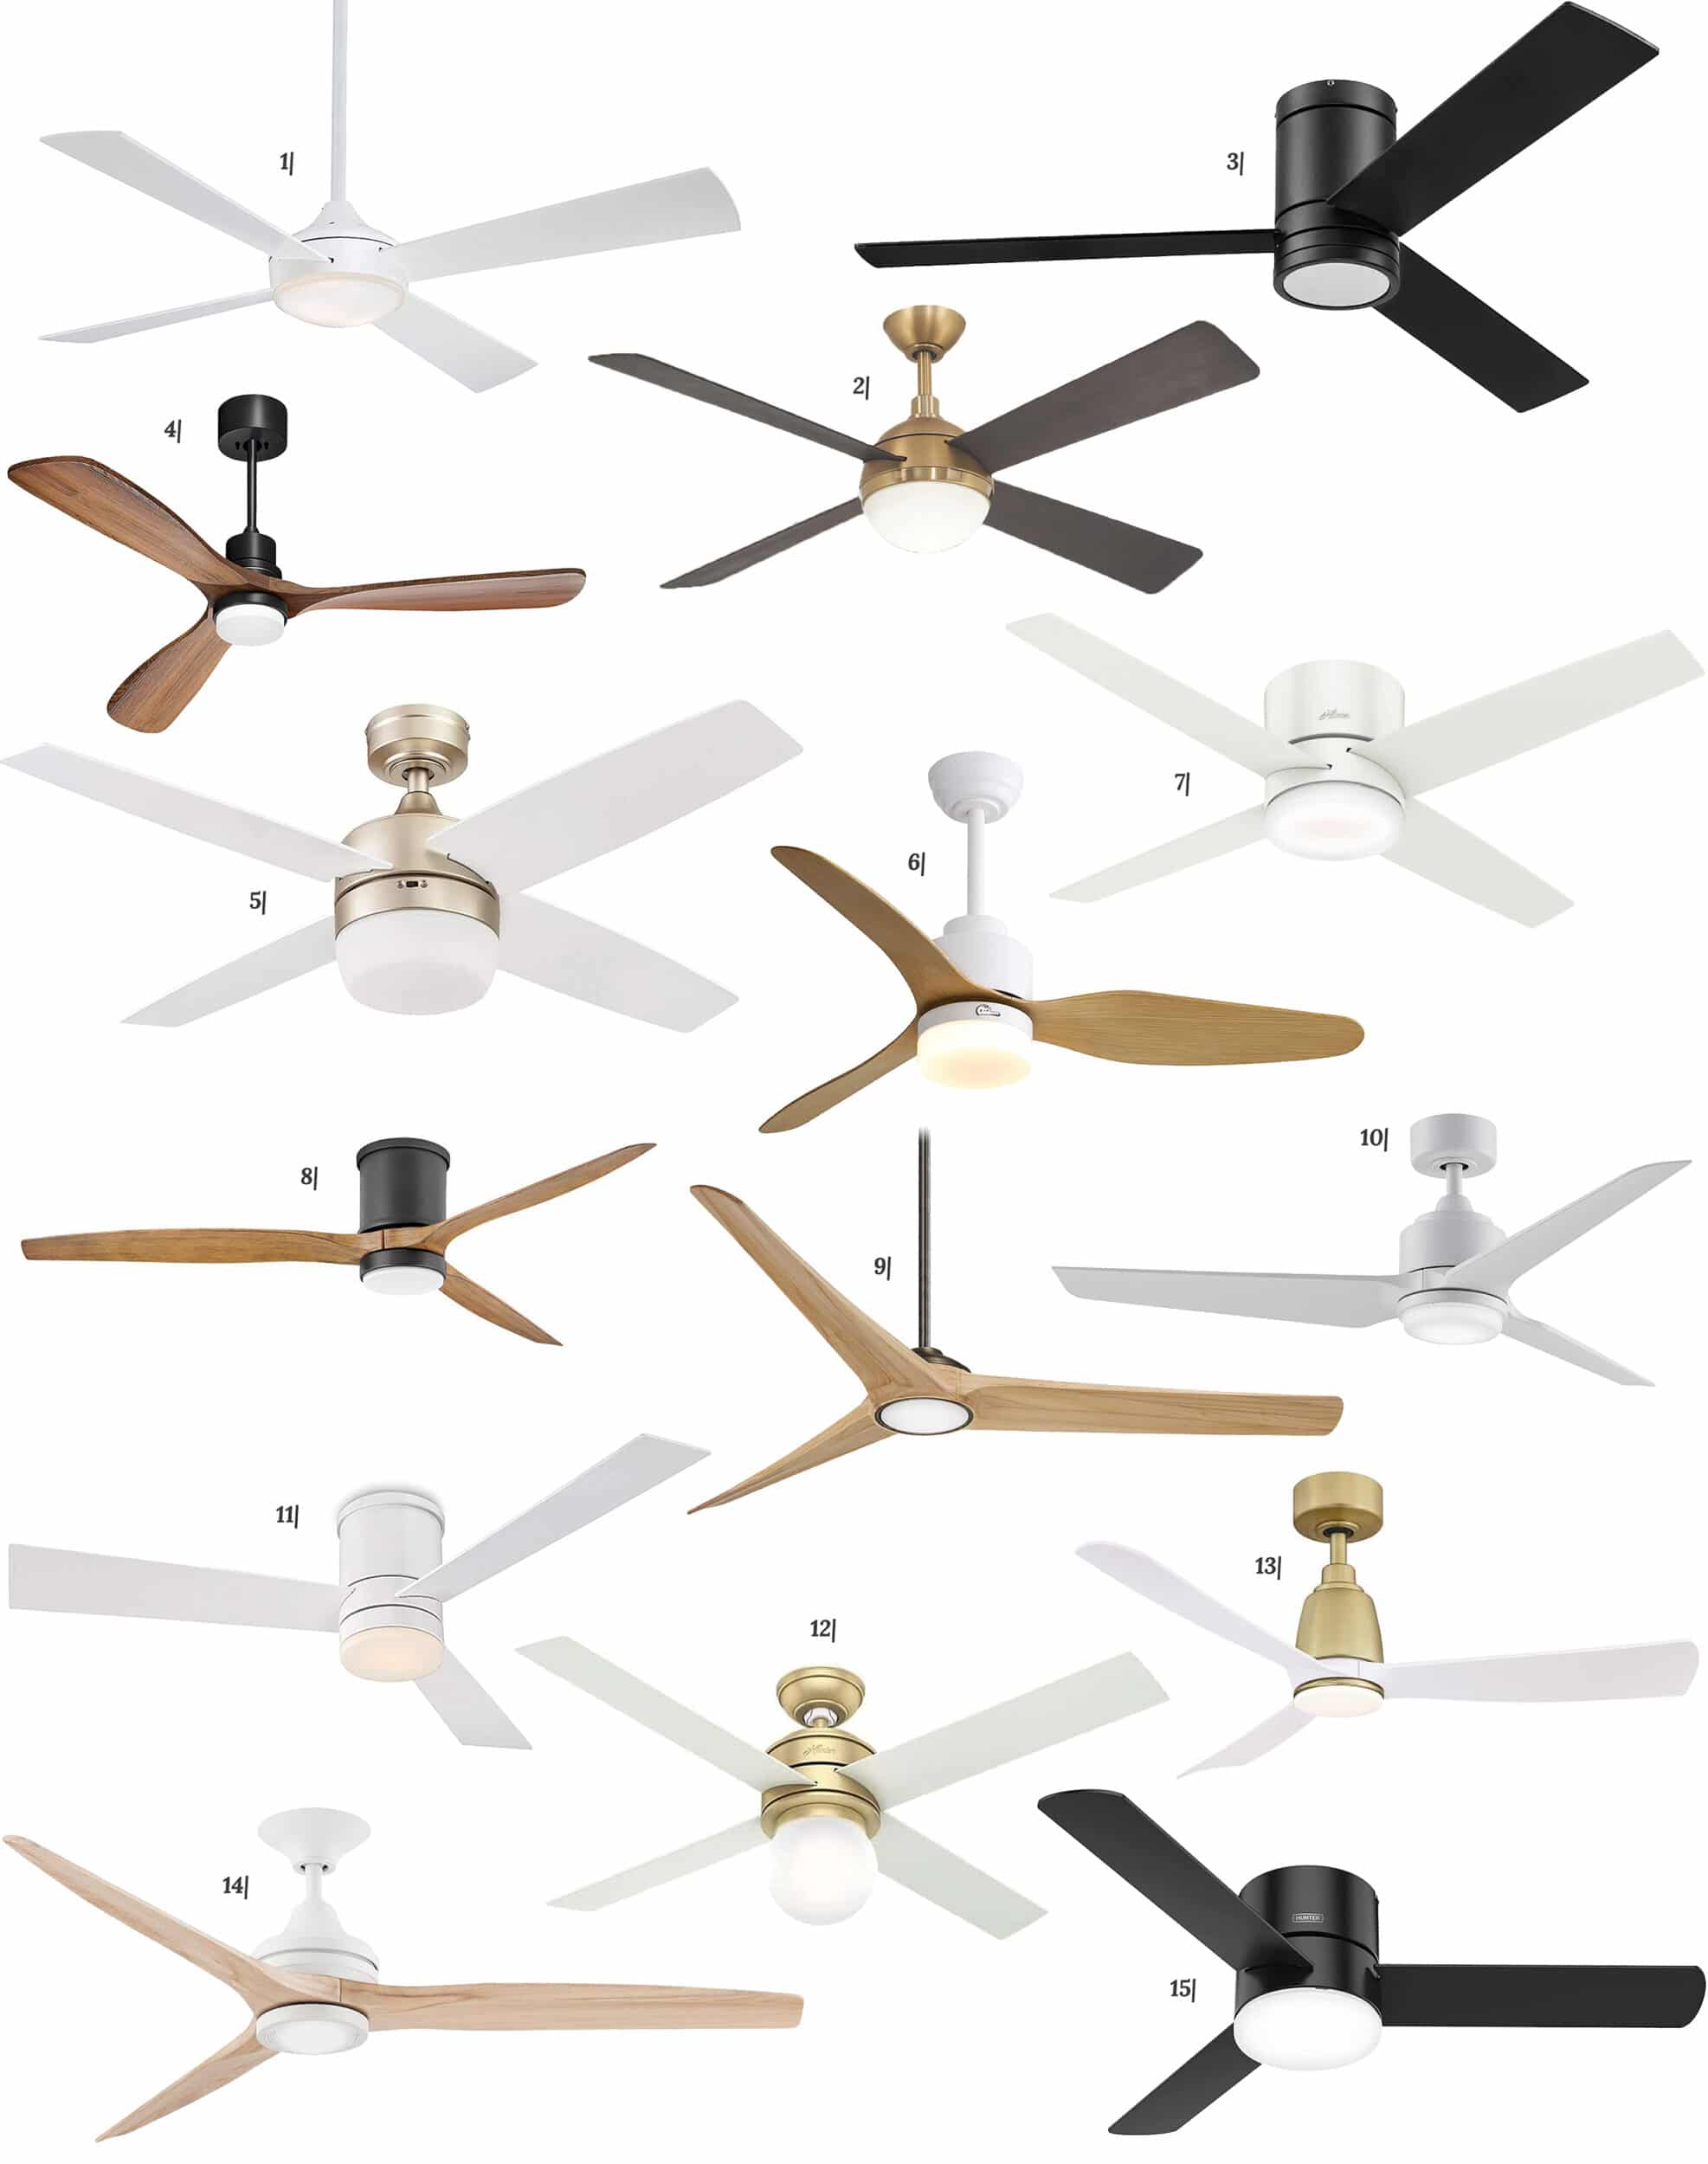 A round up of 30 ceiling fans that actually LOOK GOOD doing their thing! via Yellow Brick Home